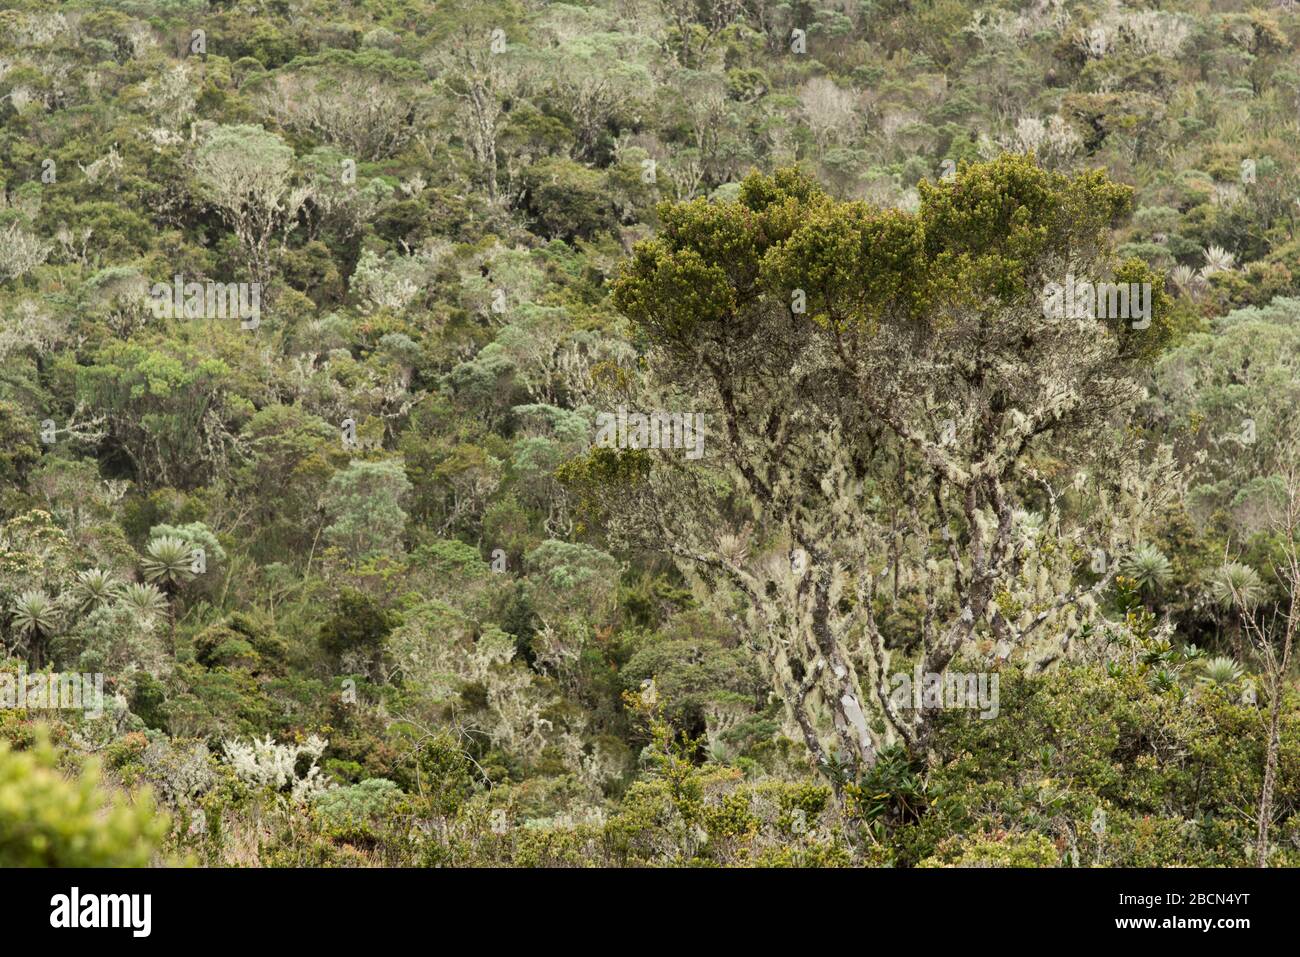 Chingaza National Natural Park, Colombia. Landscape / texture: native vegetation, trees and shrubs in different shades of green Stock Photo